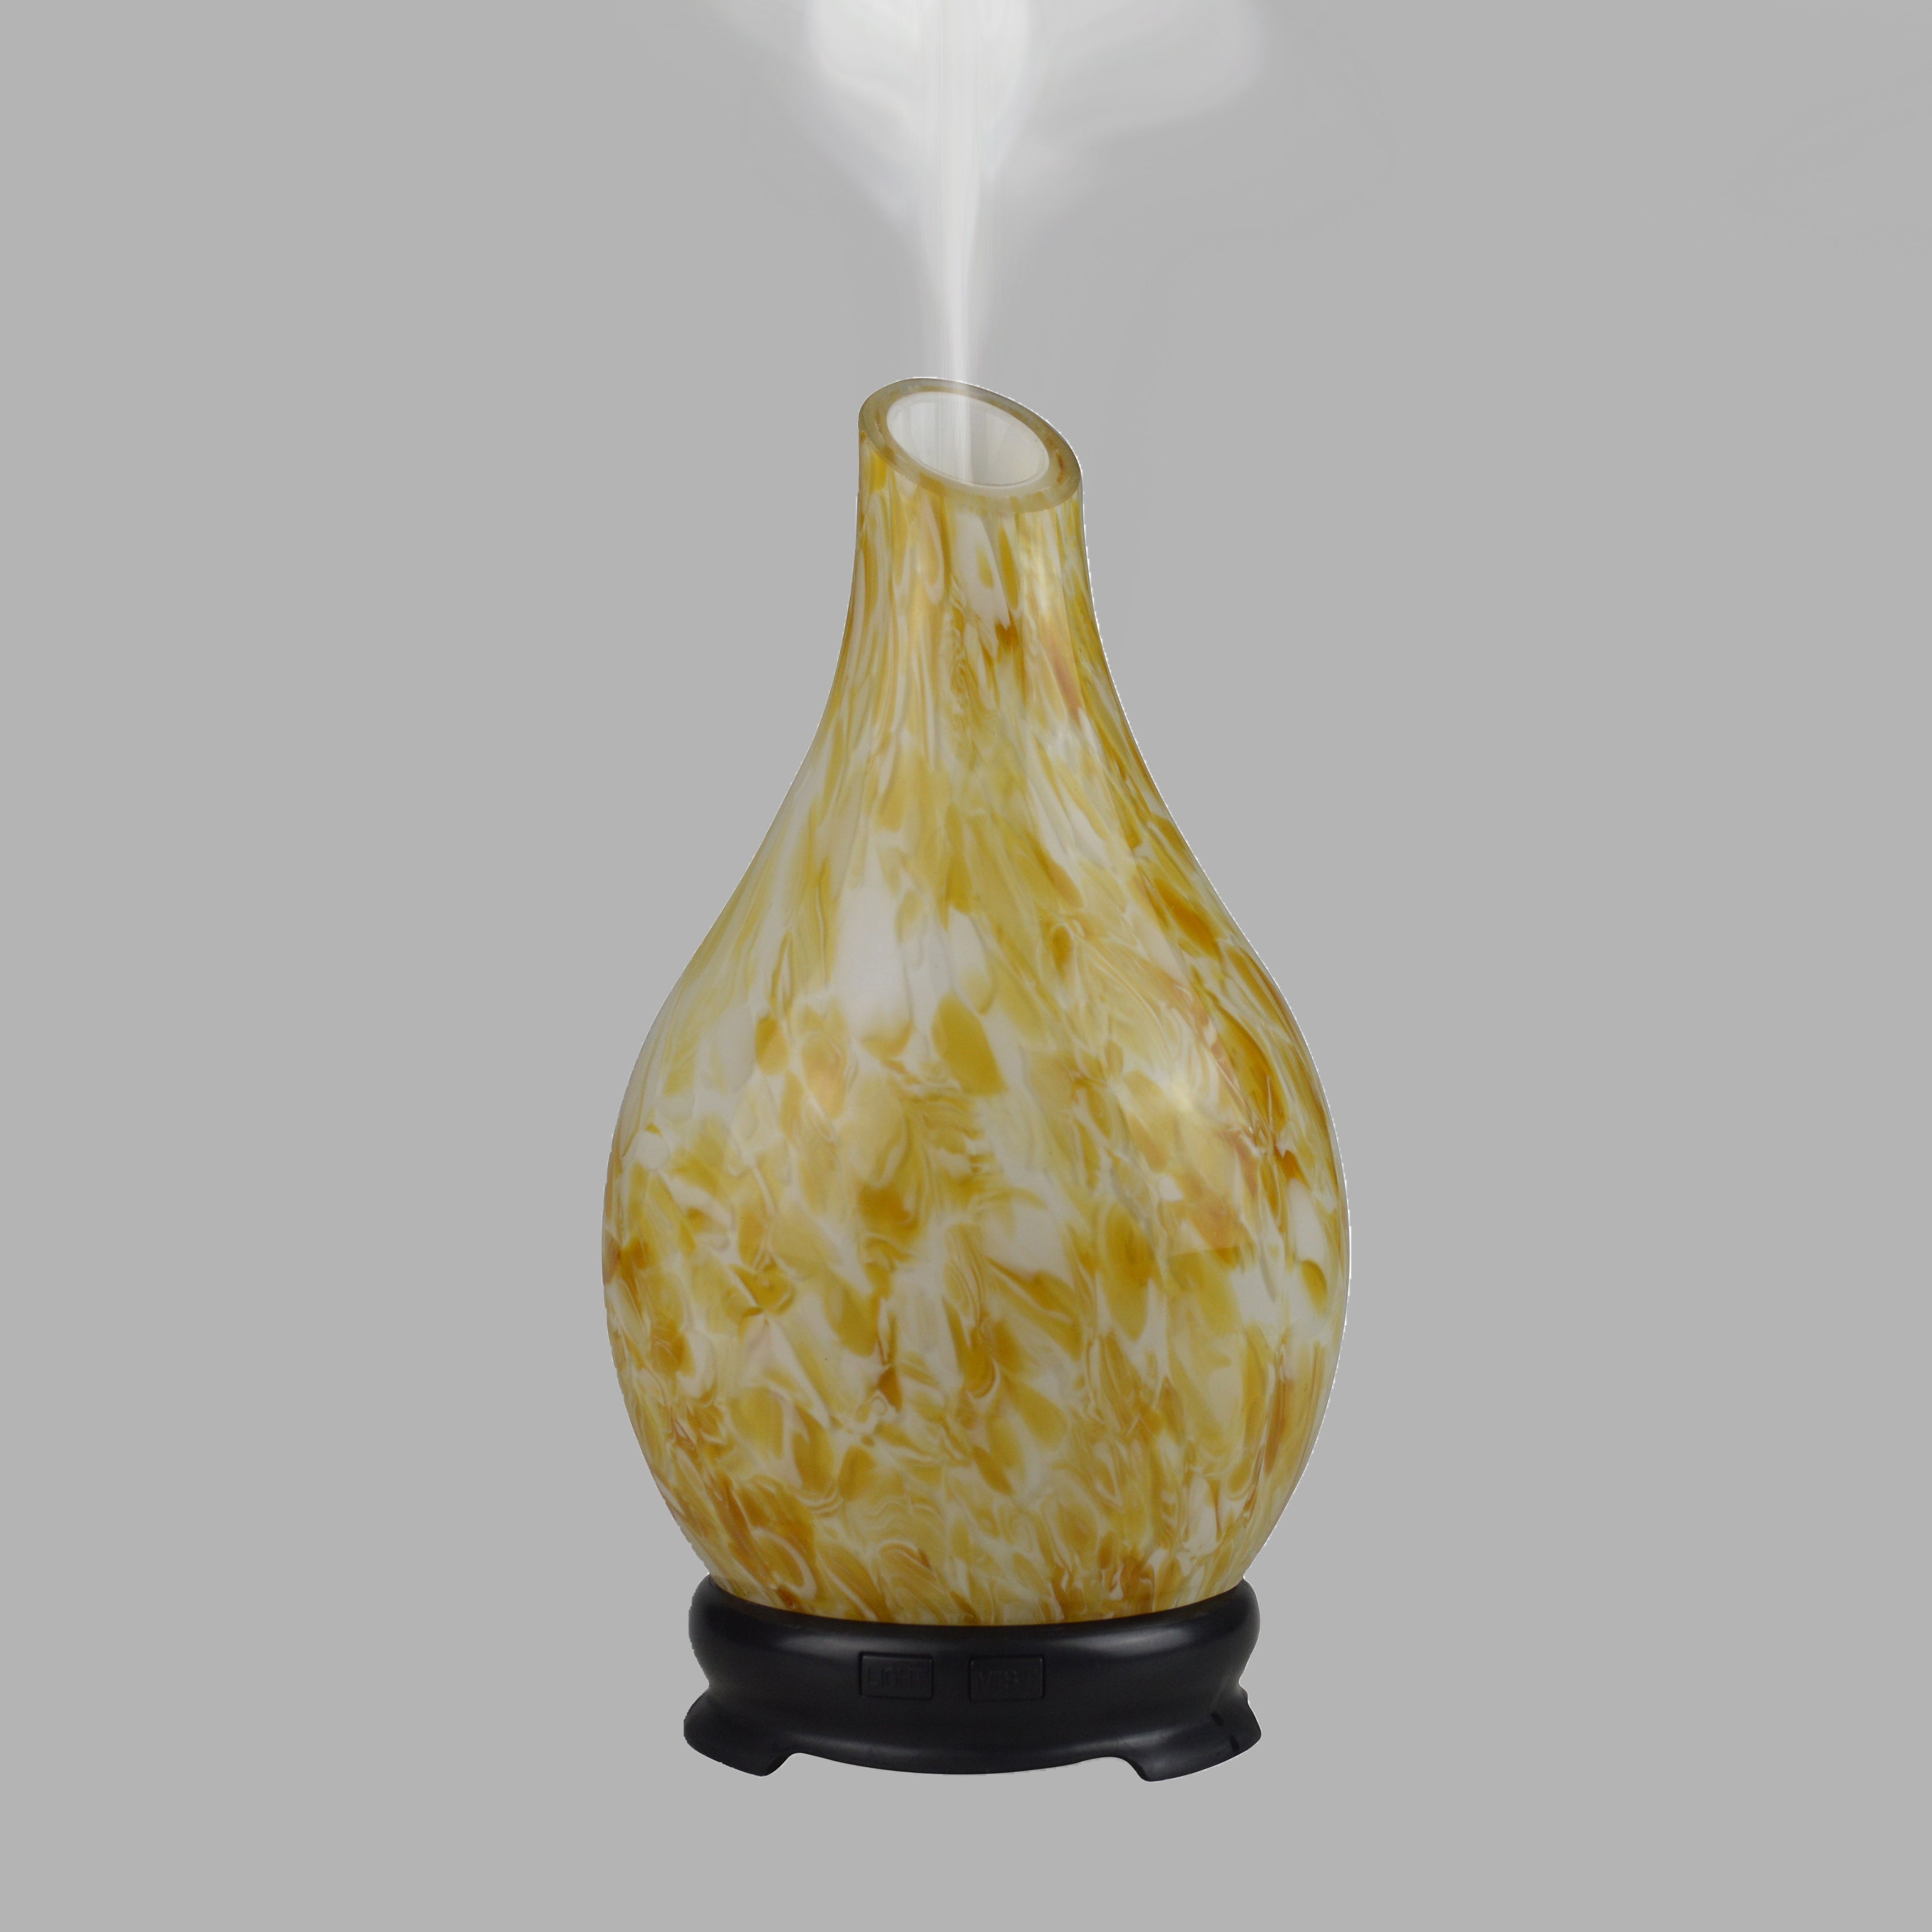 A lovely golden ray shines through when this oil diffuser is turned on, with its fetching design of yellow and white making the perfect summery look, all year-round. 